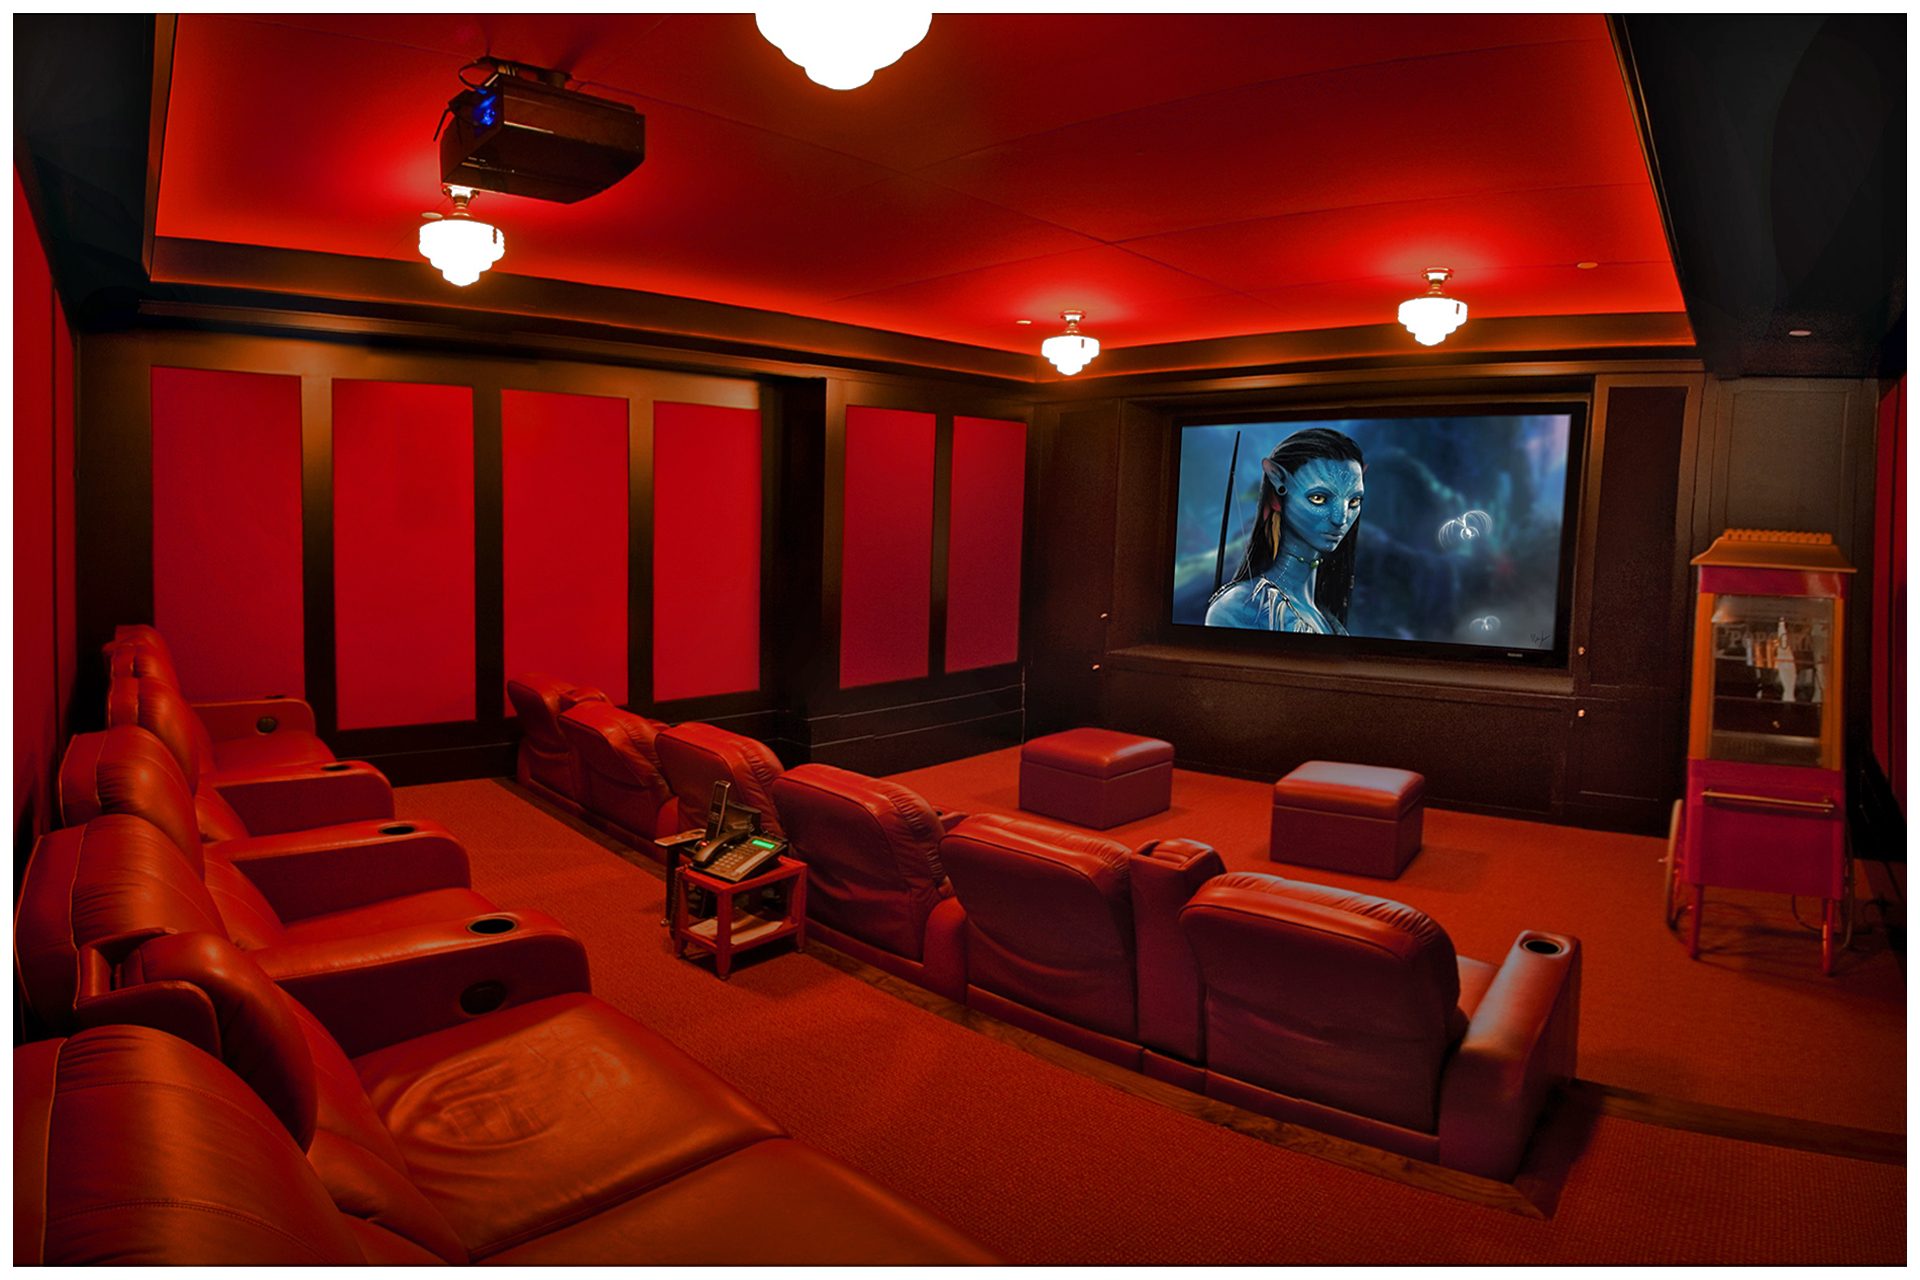 DEDICATED BASEMENT THEATER 12 seat dedicated basement theater with Acoustic paneling to limit sound intrusion outside the room. Front Speaker elements are enclosed into cabinetry and all other  speakers are placed under acoustical panels.Screen and seating are placed on the right side of the room to allow a wide isle leading to exit door in so doing, seats in the center are centered on the screen and front speakers.System is enclosed in an adjacent closet.